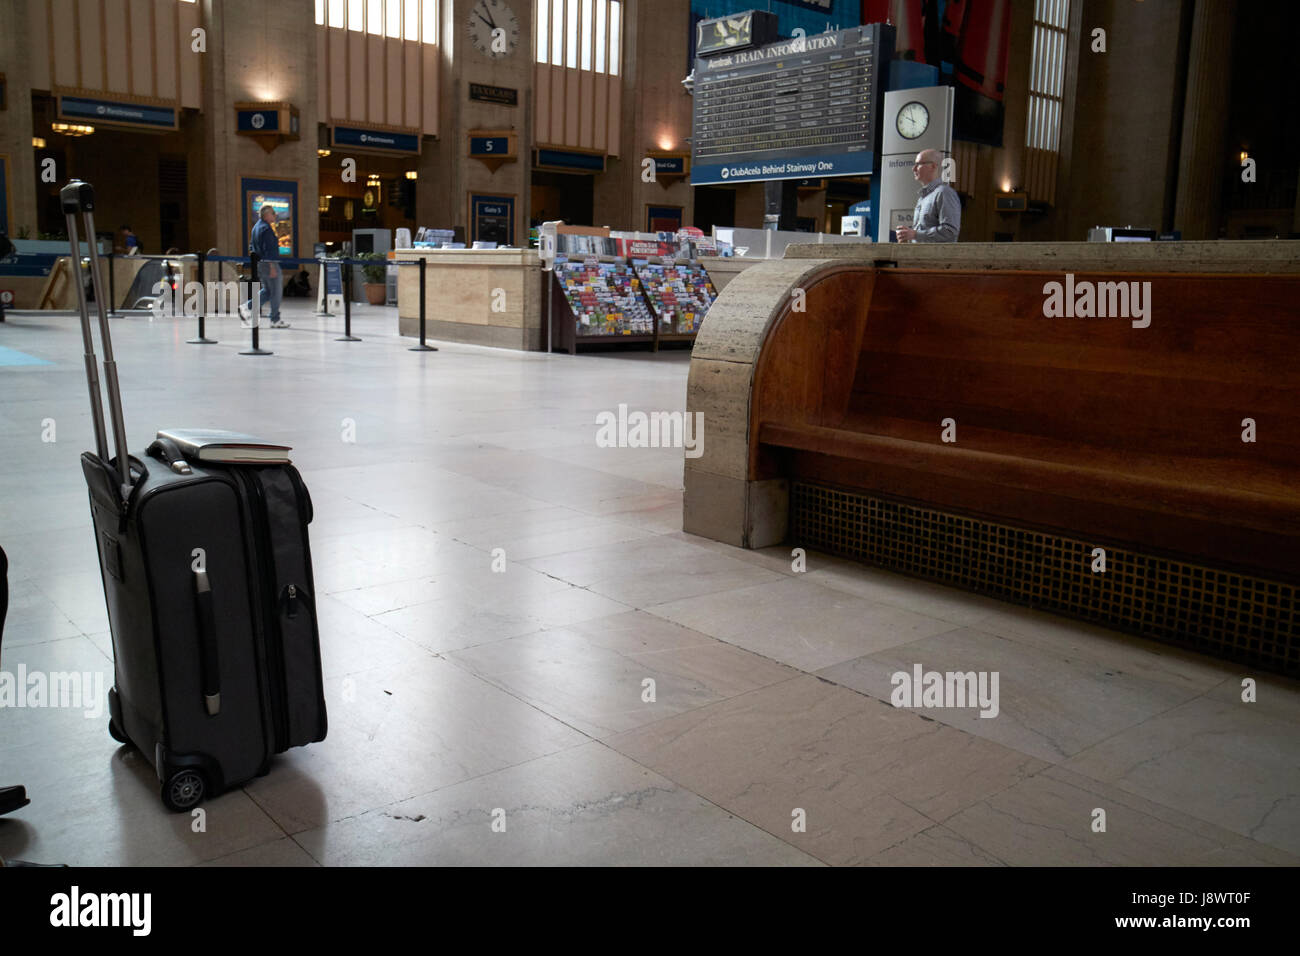 long wooden benches in main waiting room inside septa 30th street train station Philadelphia USA Stock Photo